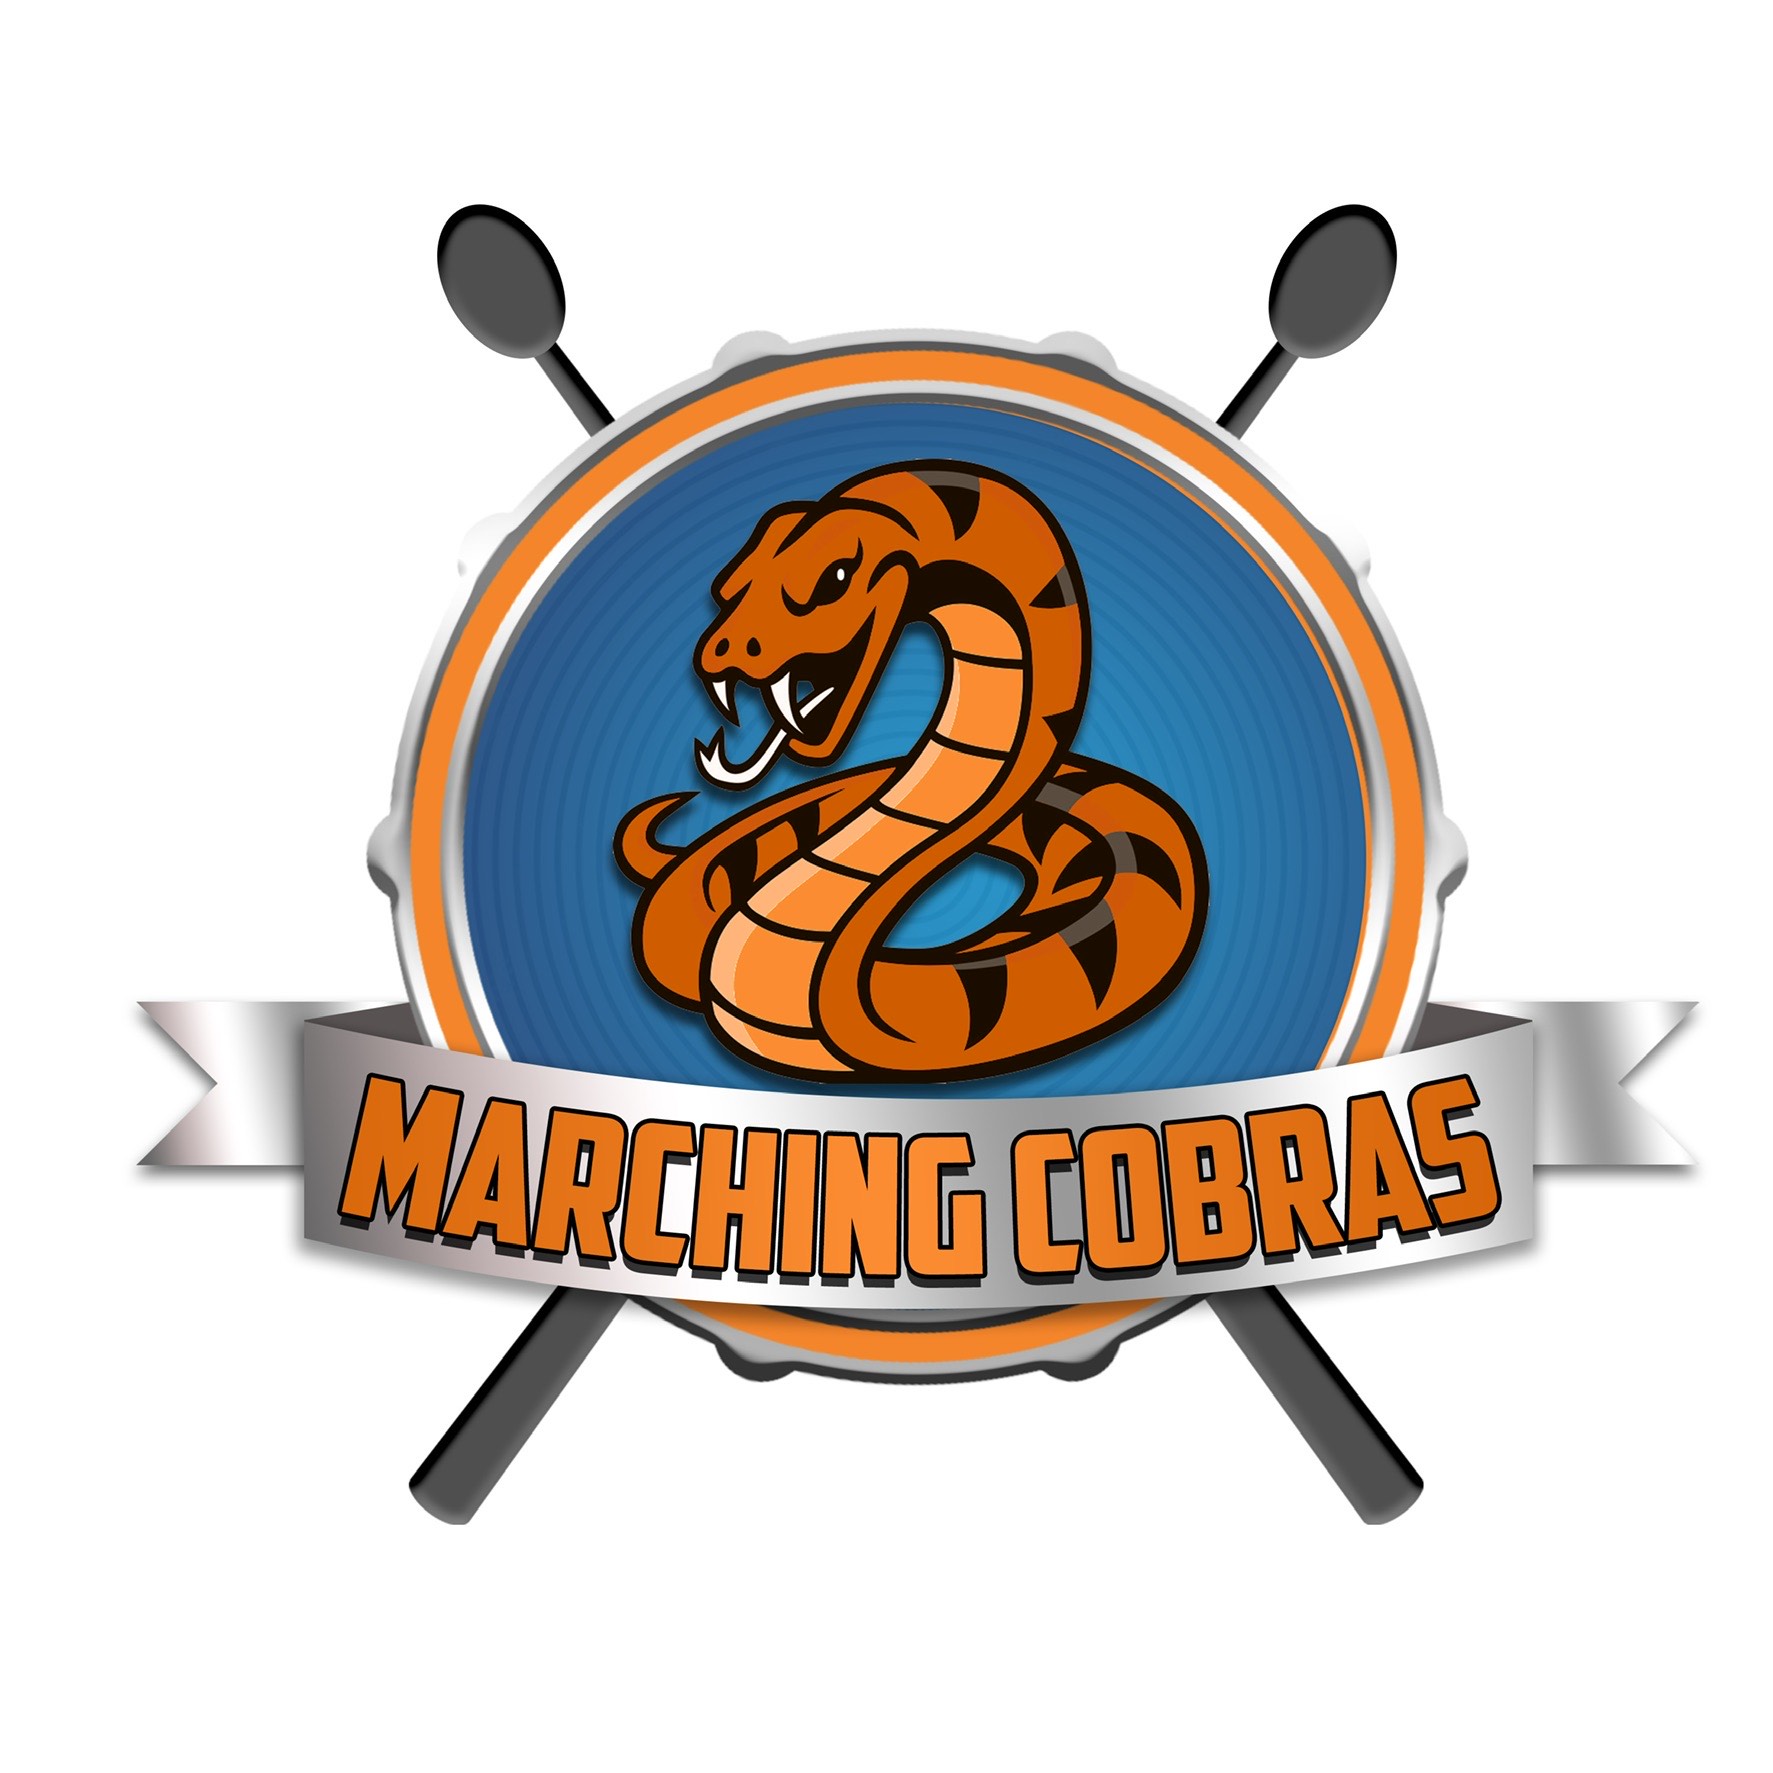 A logo with a drum and drum sticks, with an organge cobra in the middle.